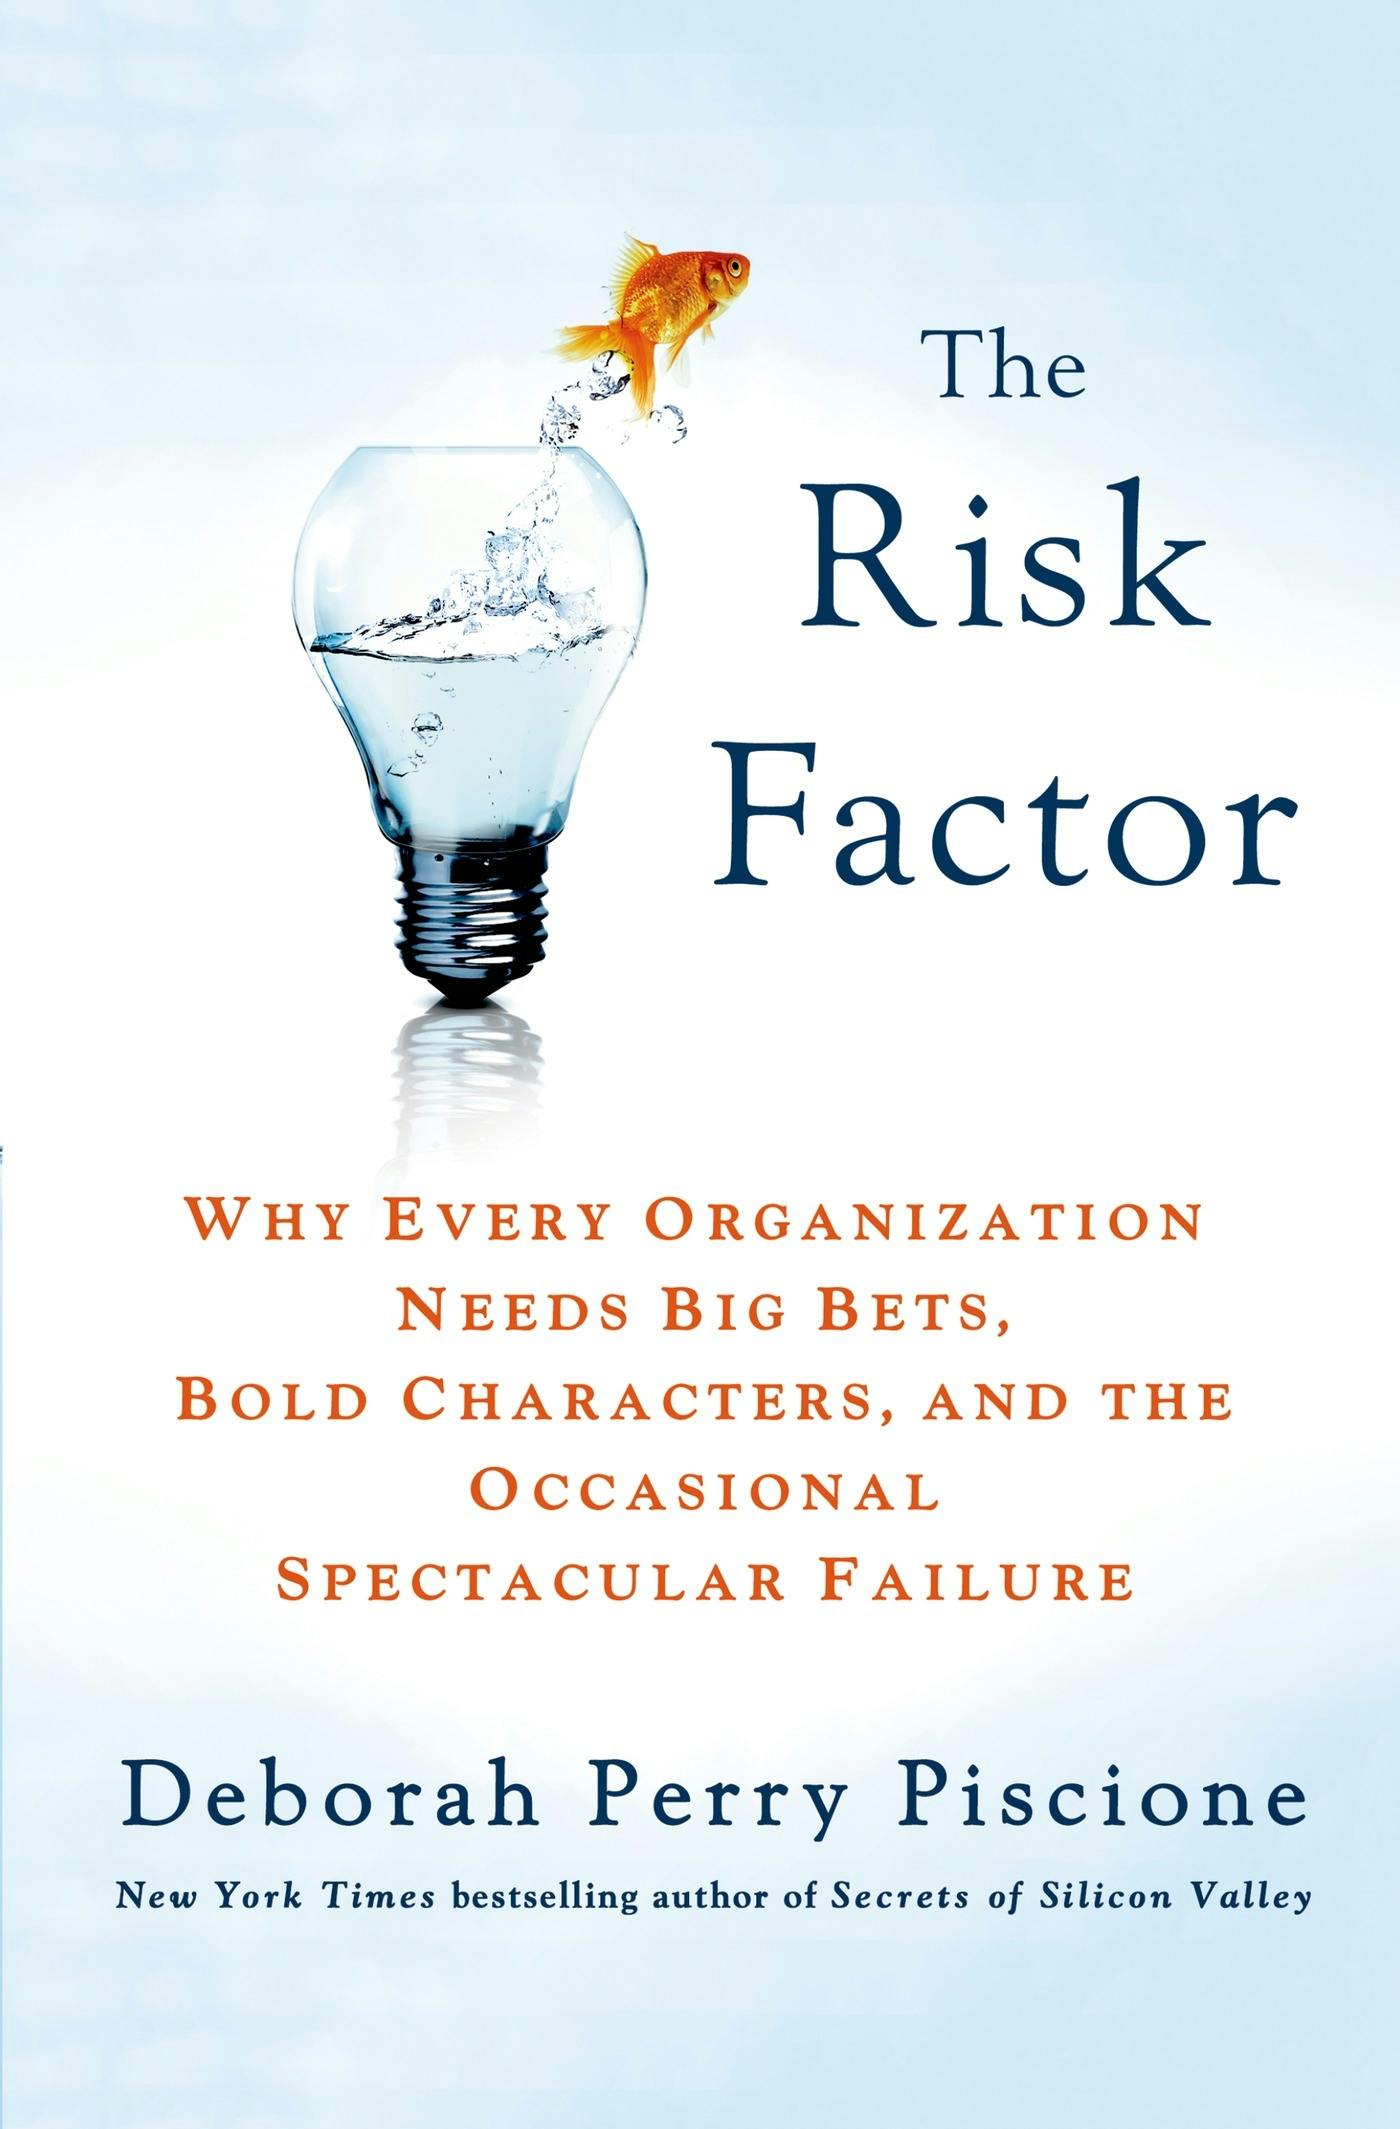 Describes for The Risk Factor by authors